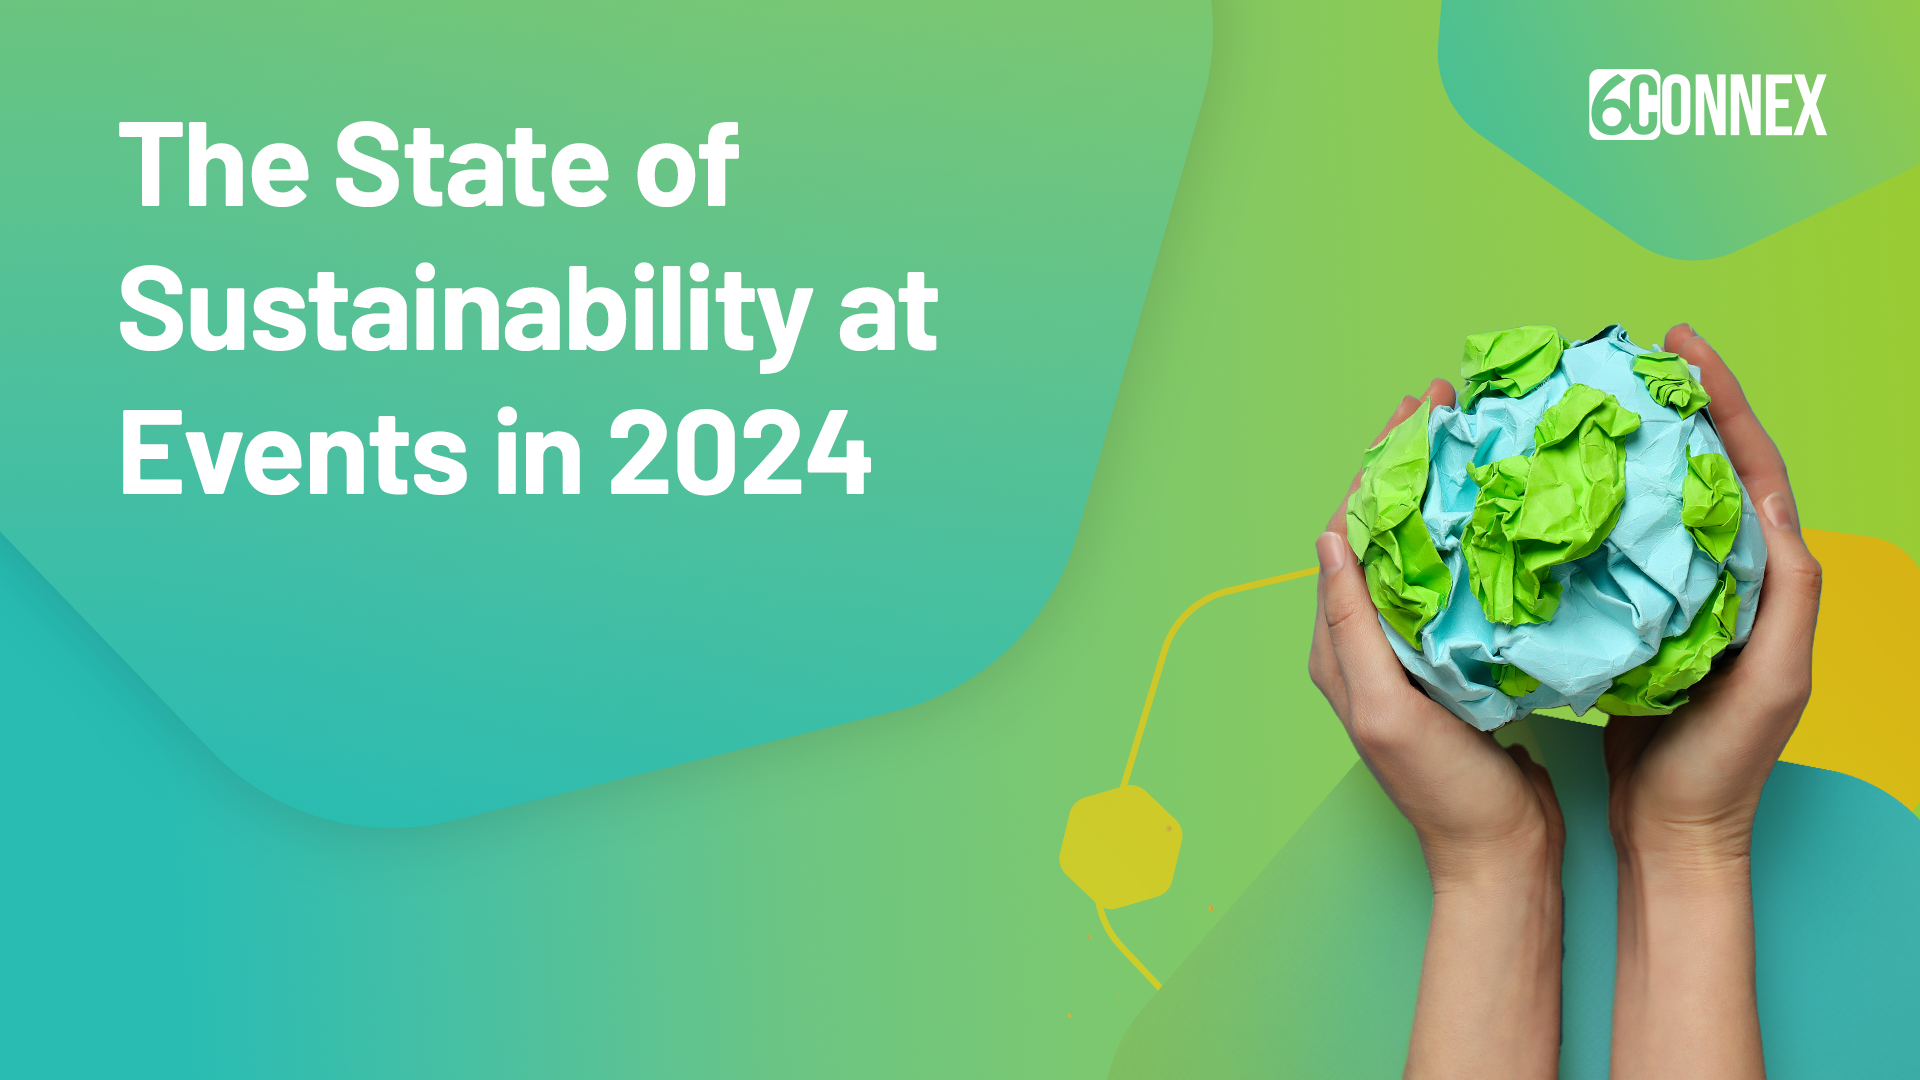 The State of Sustainability at Events in 2024